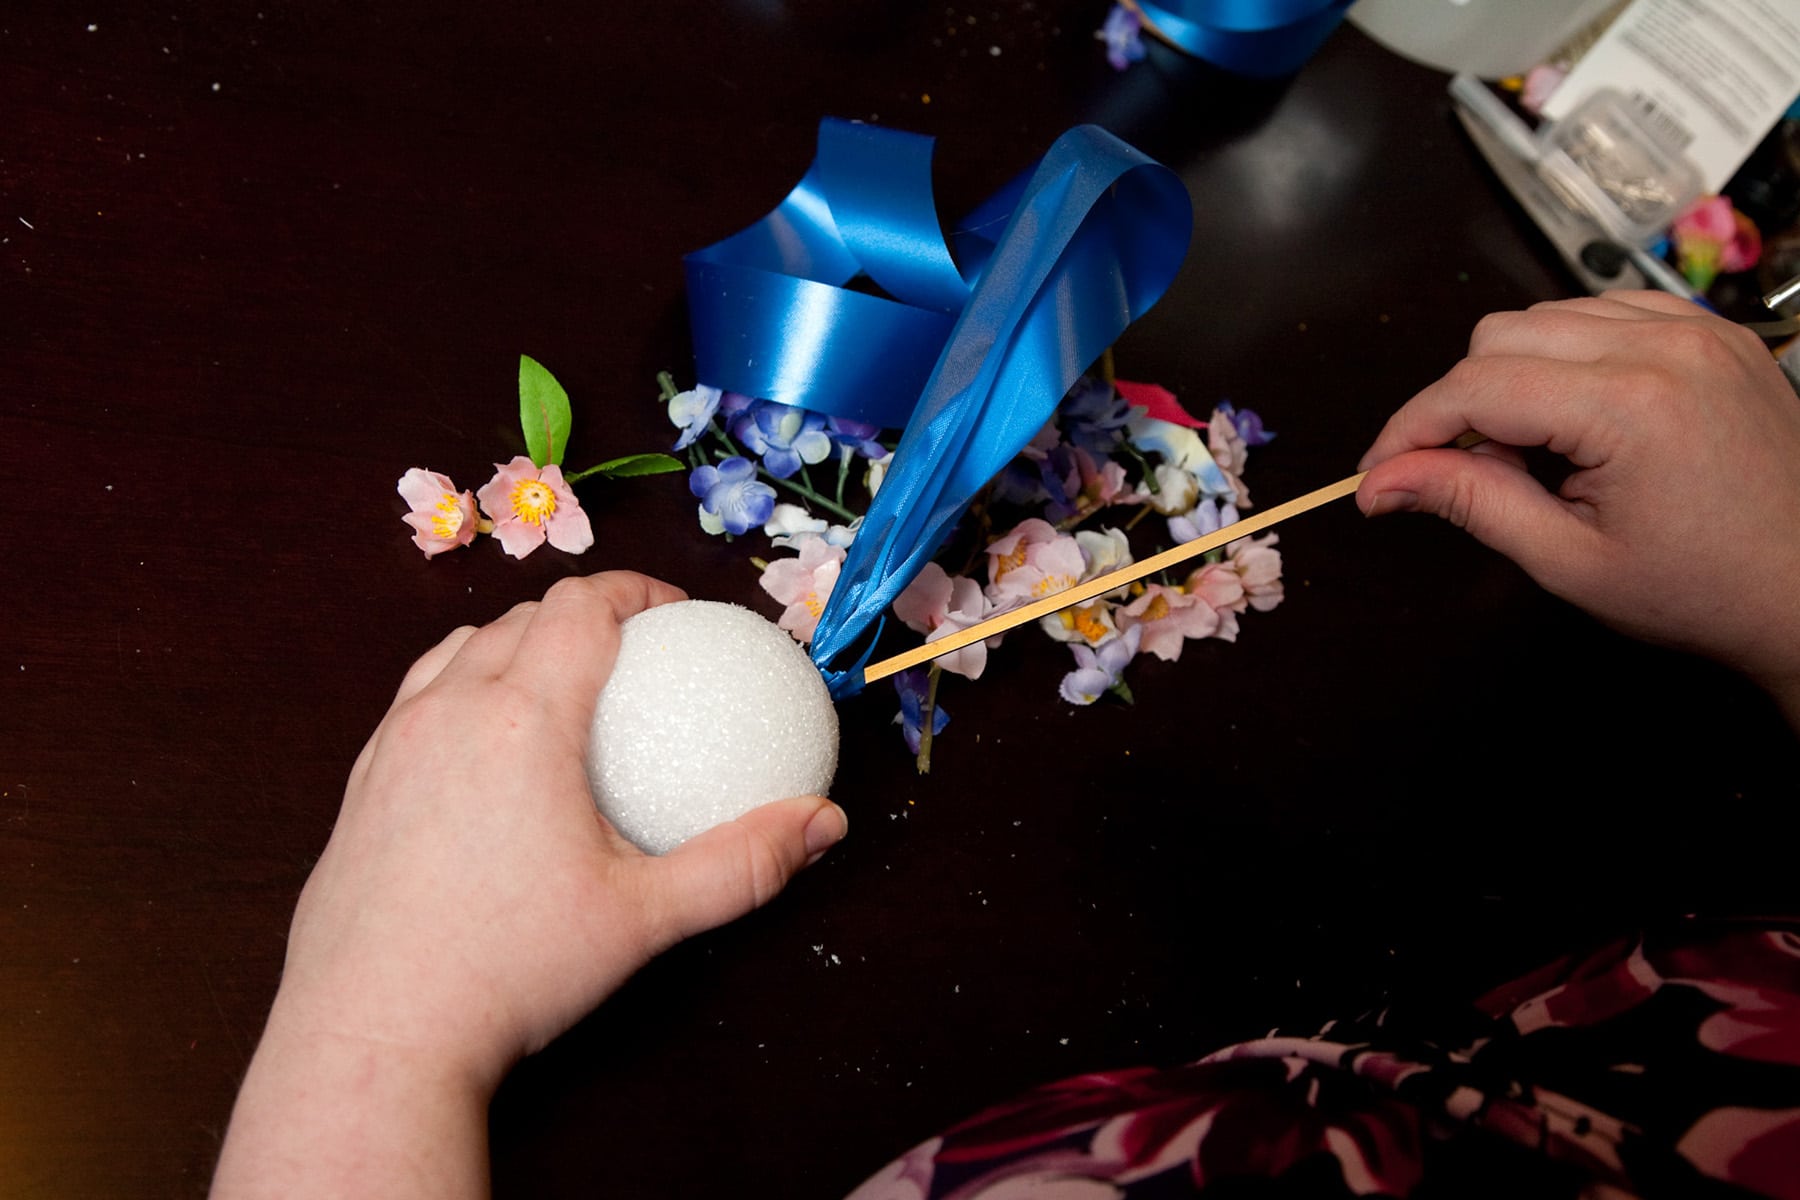 A chopstick is being used to poke a ribbon through a styrofoam ball.